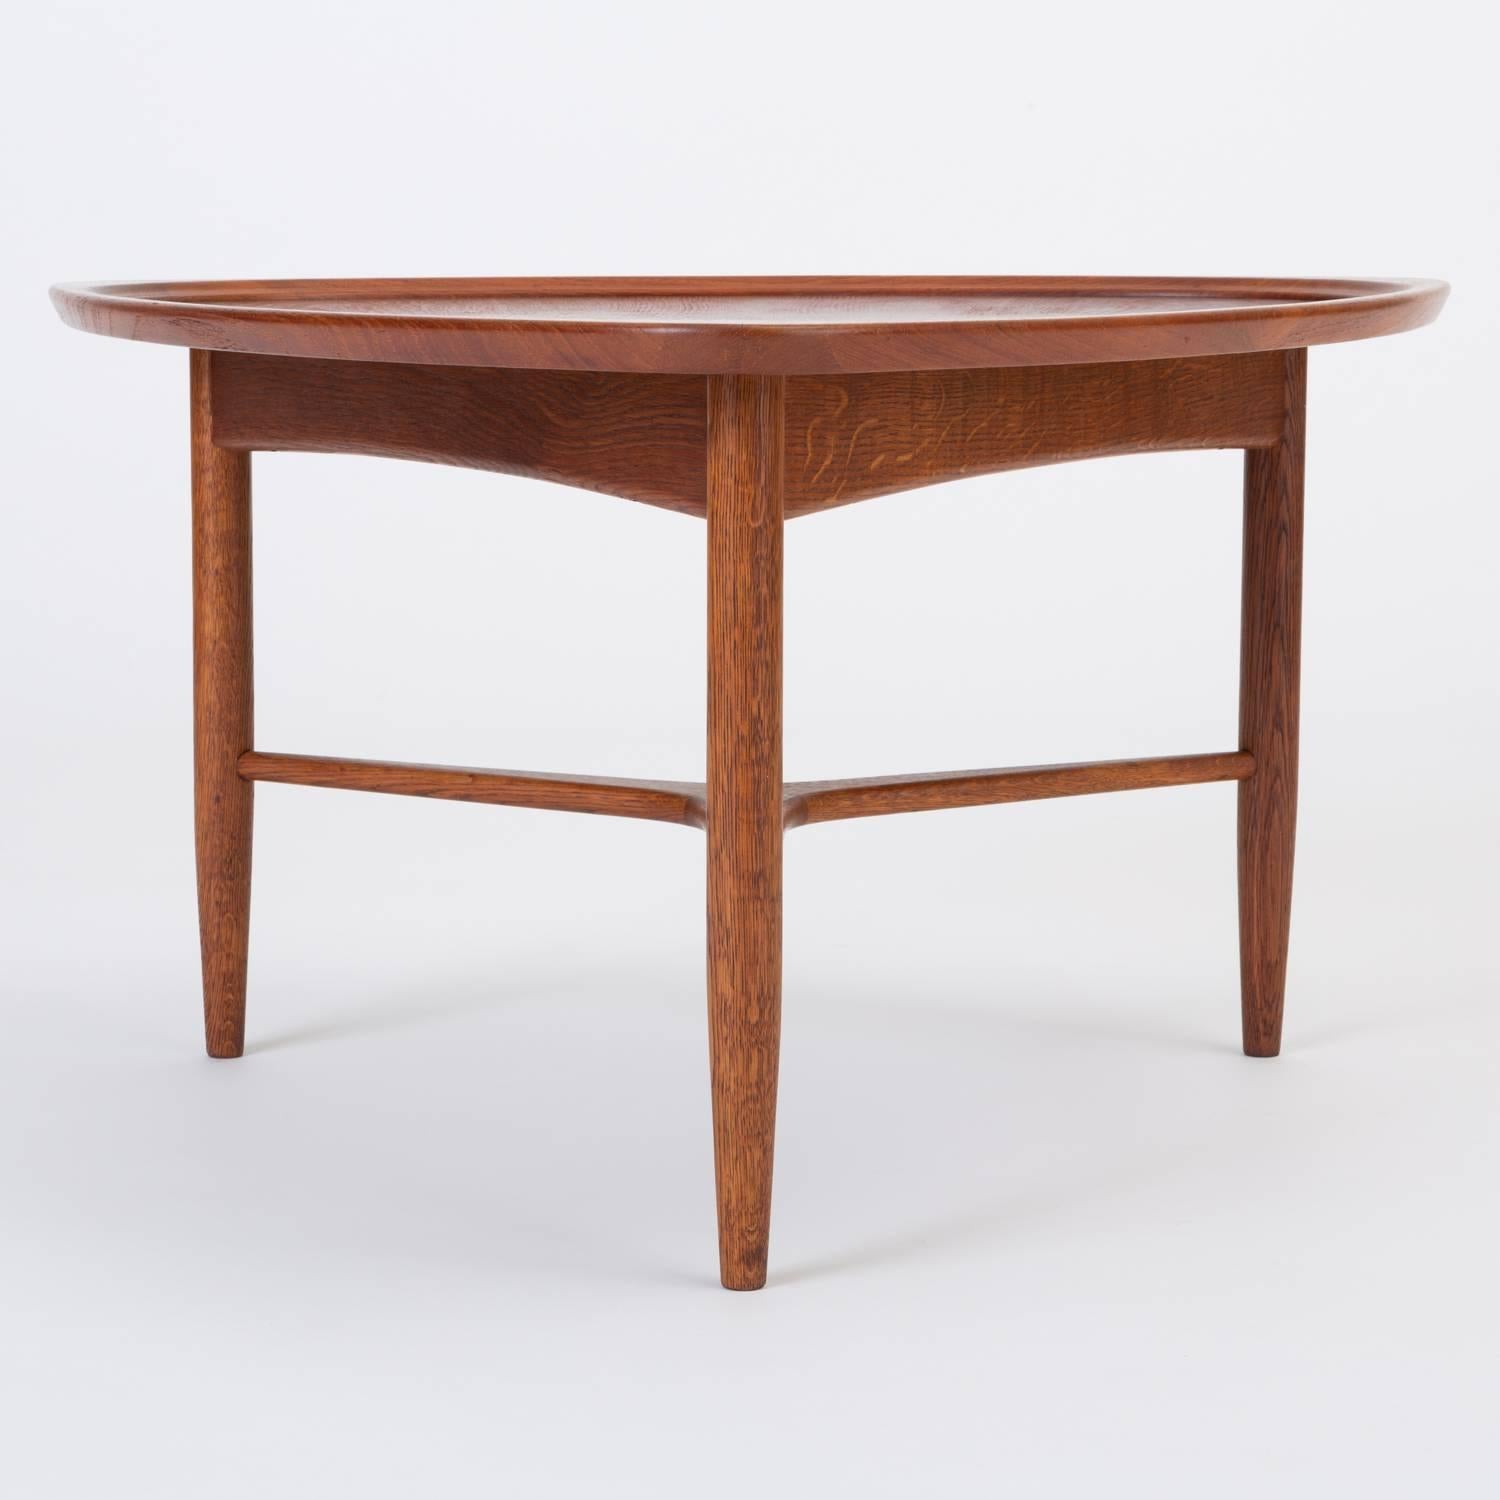 A Scandinavian Modern teak occasional table has a triangular “guitar pick” shape and three tapered dowel legs. The piece, in strong-grained teak wood, is distinguished by a recessed, Reuleaux-triangular well in its surface, and by sophisticated